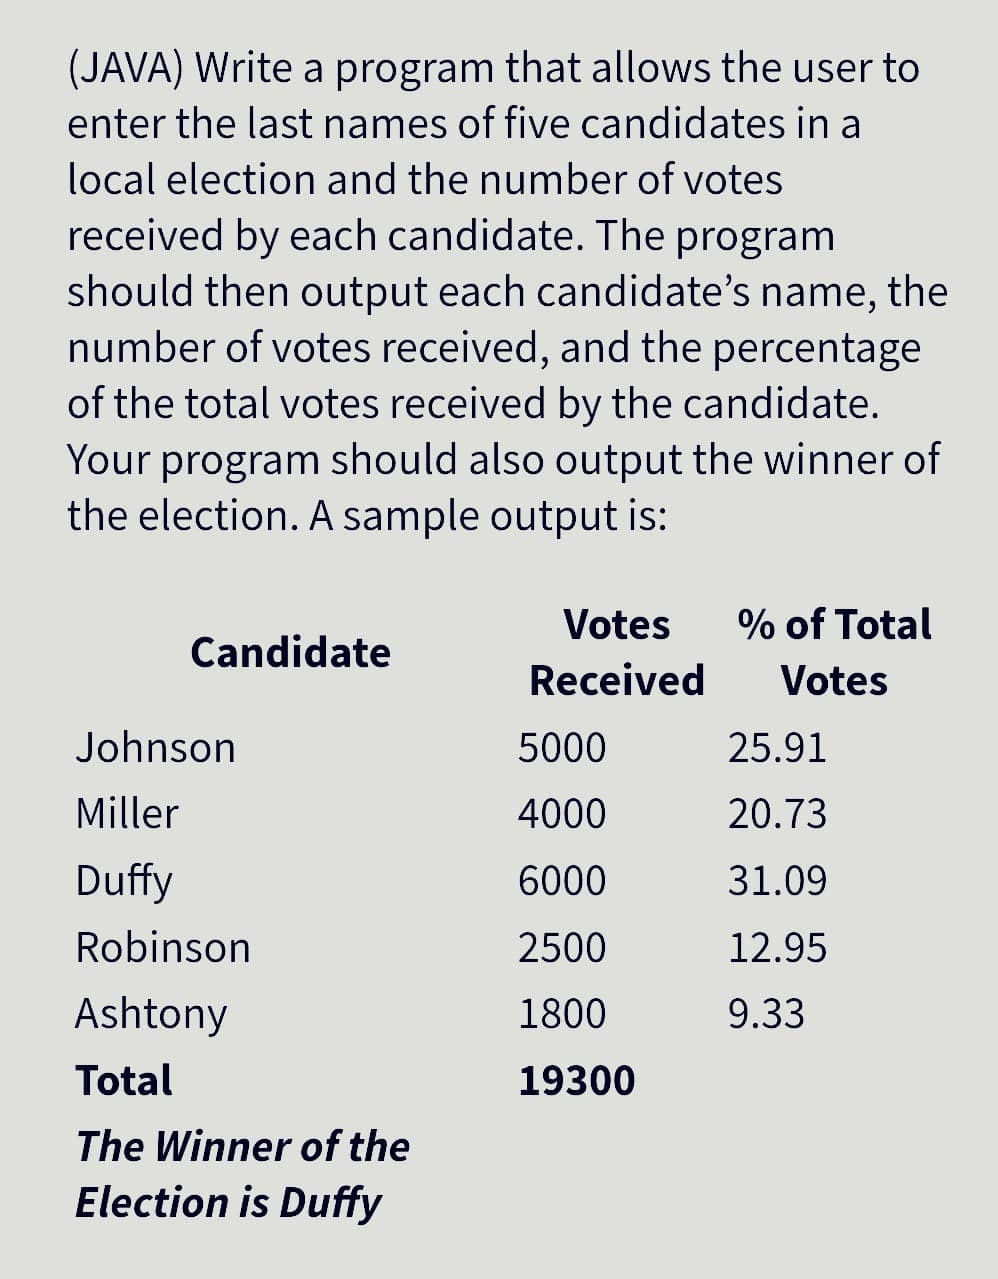 (JAVA) Write a program that allows the user to
enter the last names of five candidates in a
local election and the number of votes
received by each candidate. The program
should then output each candidate's name, the
number of votes received, and the percentage
of the total votes received by the candidate.
Your program should also output the winner of
the election. A sample output is:
Votes
% of Total
Candidate
Received
Votes
Johnson
5000
25.91
Miller
4000
20.73
Duffy
6000
31.09
Robinson
2500
12.95
Ashtony
1800
9.33
Total
19300
The Winner of the
Election is Duffy
